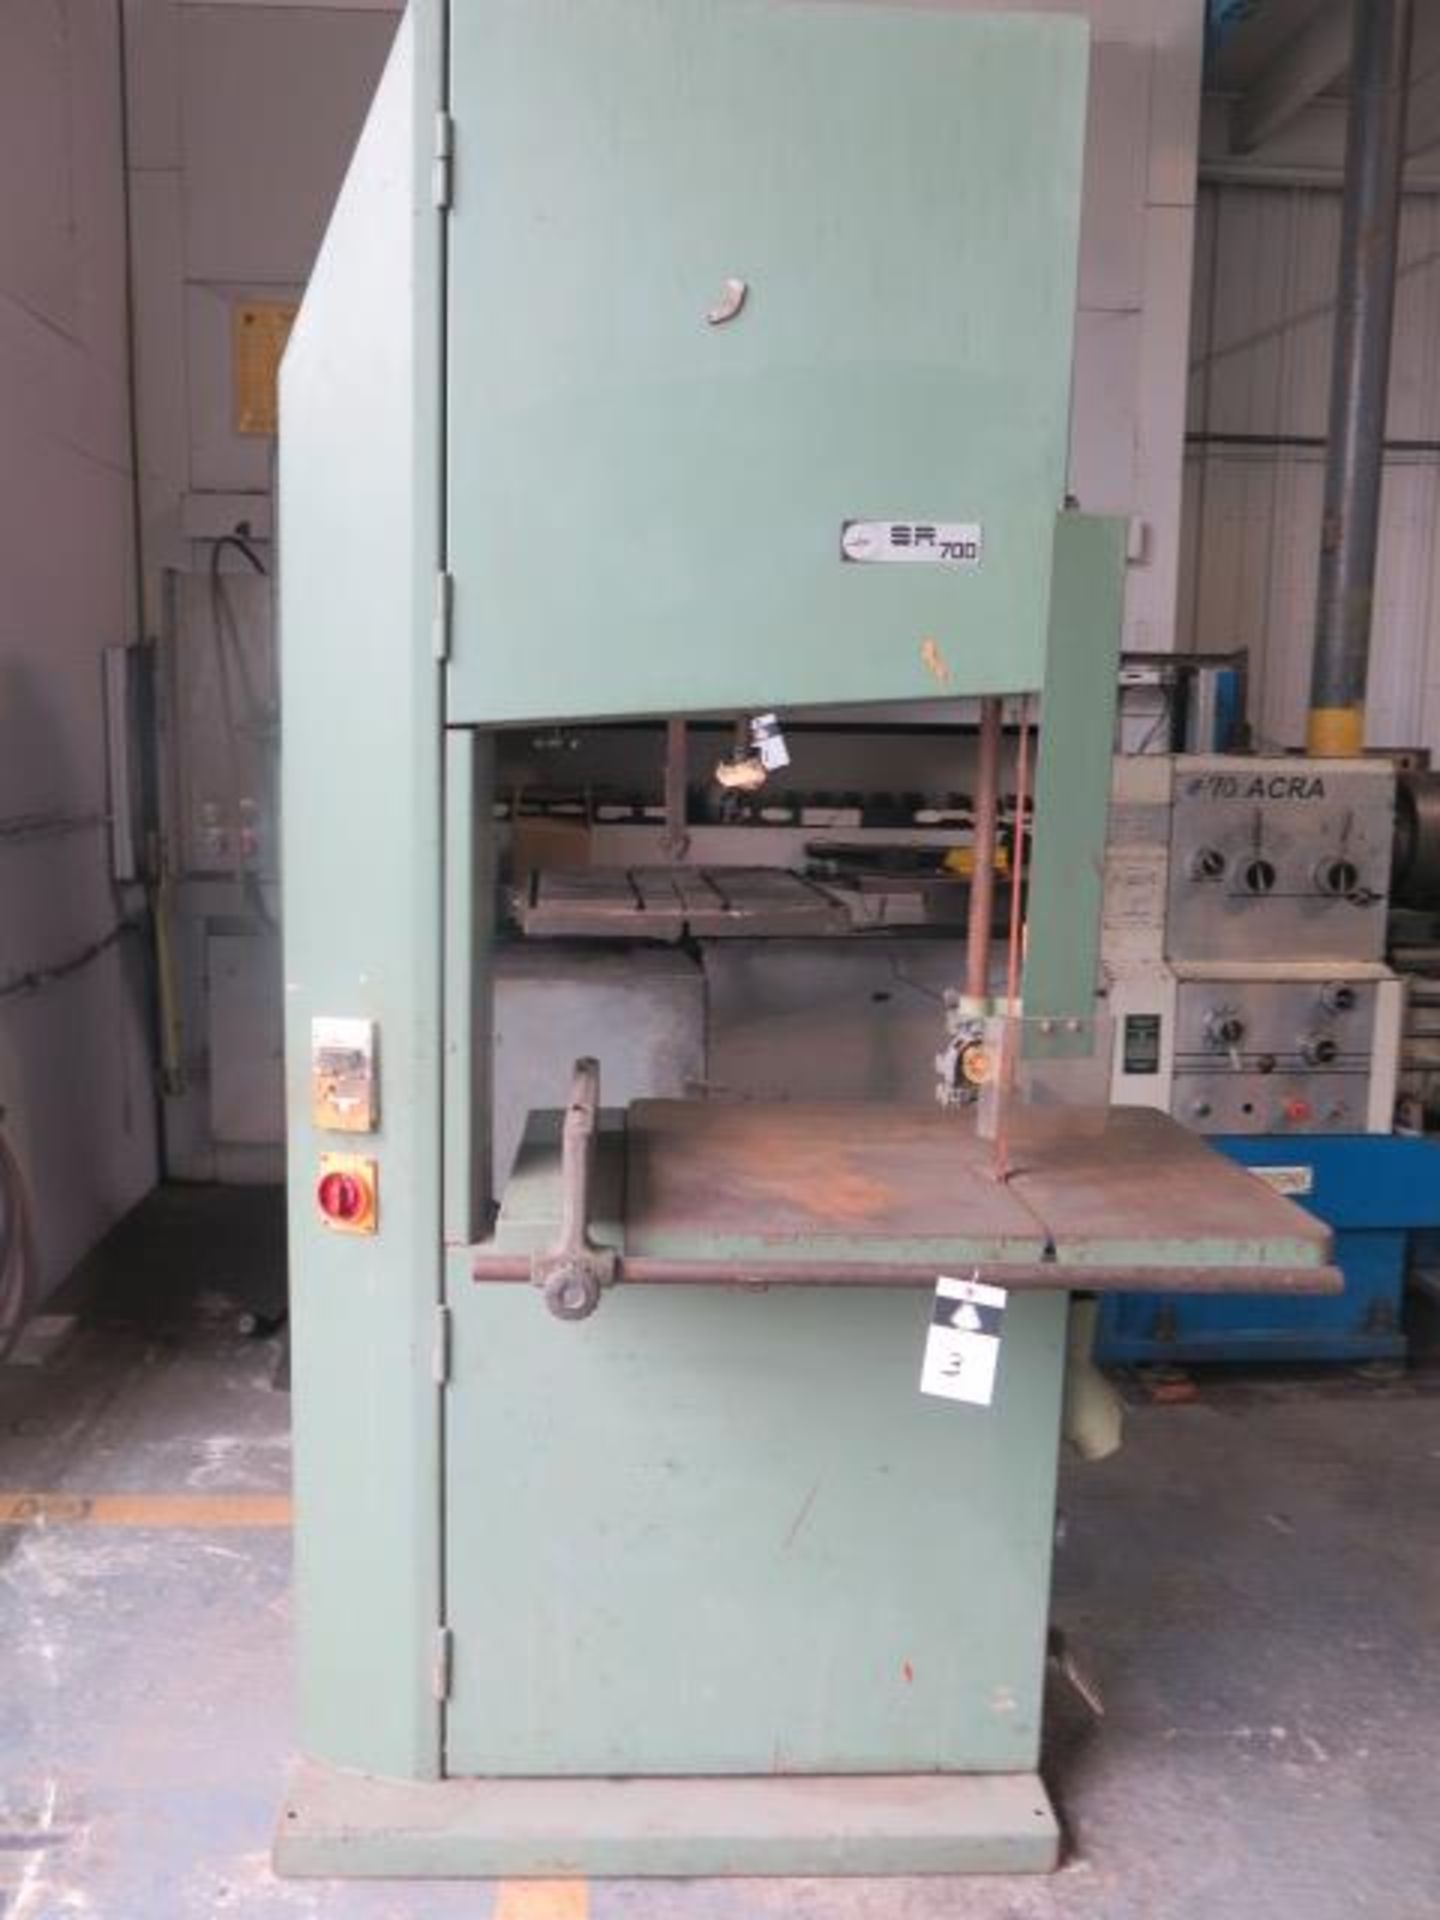 Meber SR-700 Vertical Band Saw (SOLD AS-IS - NO WARRANTY)